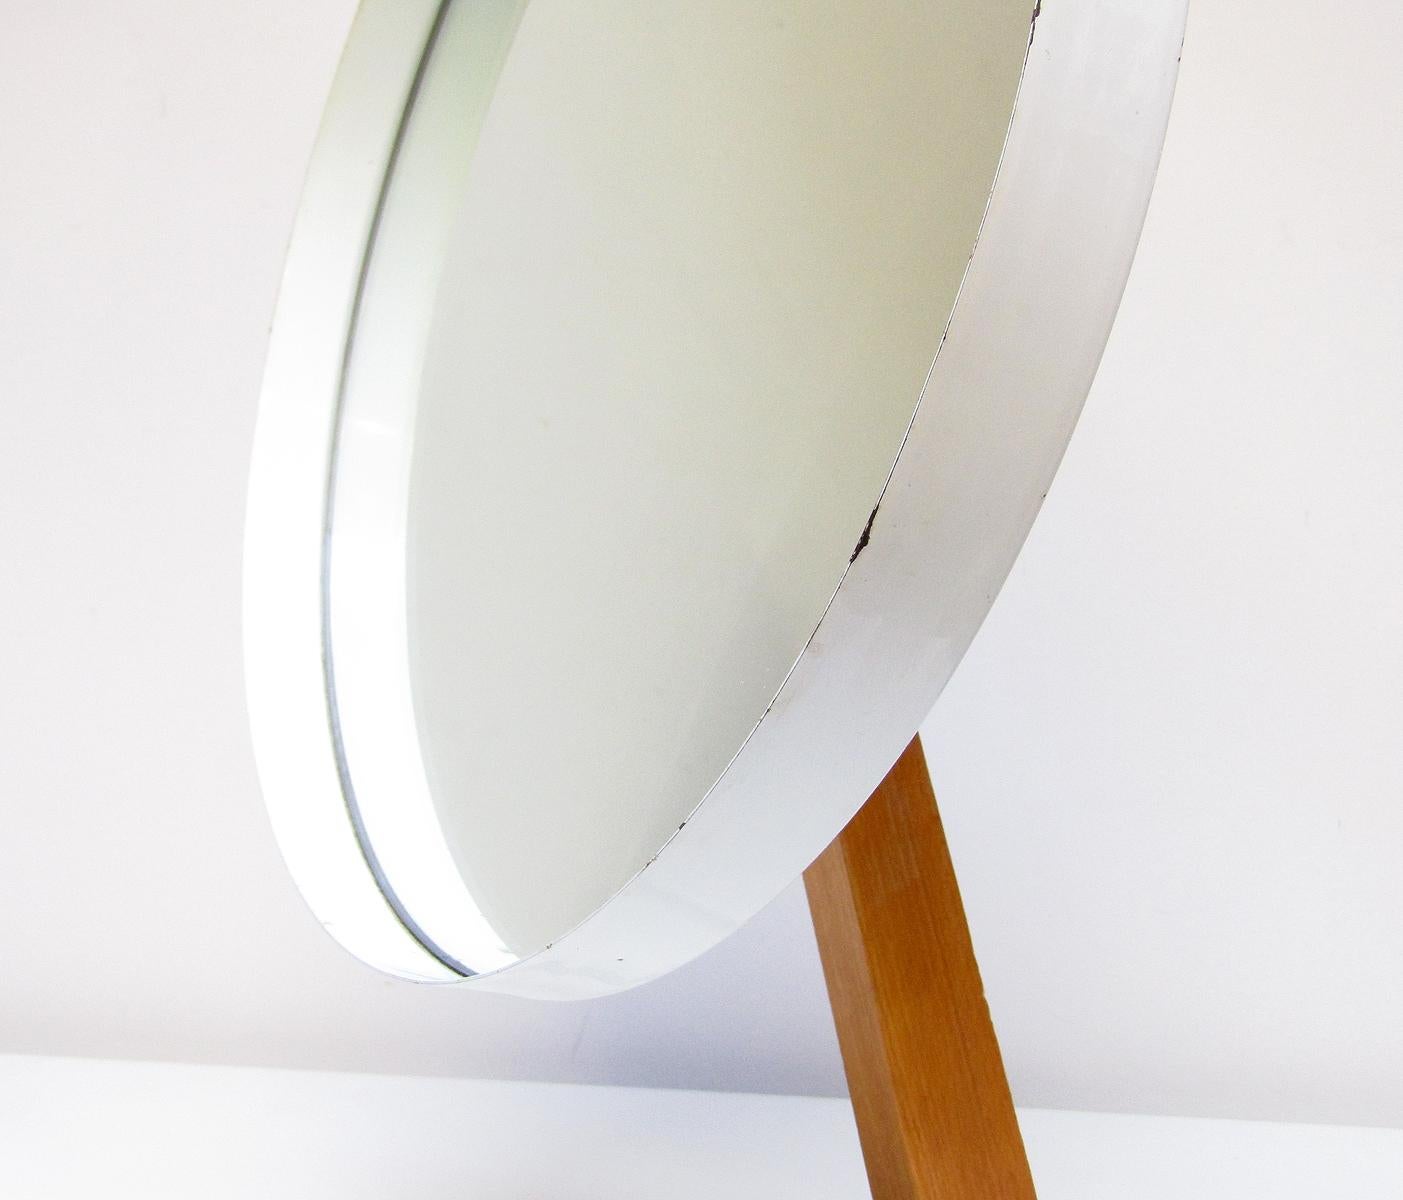 Large Round Minimalist 1960s Table Mirror by Robert Welch for Durlston Designs In Good Condition For Sale In Shepperton, Surrey